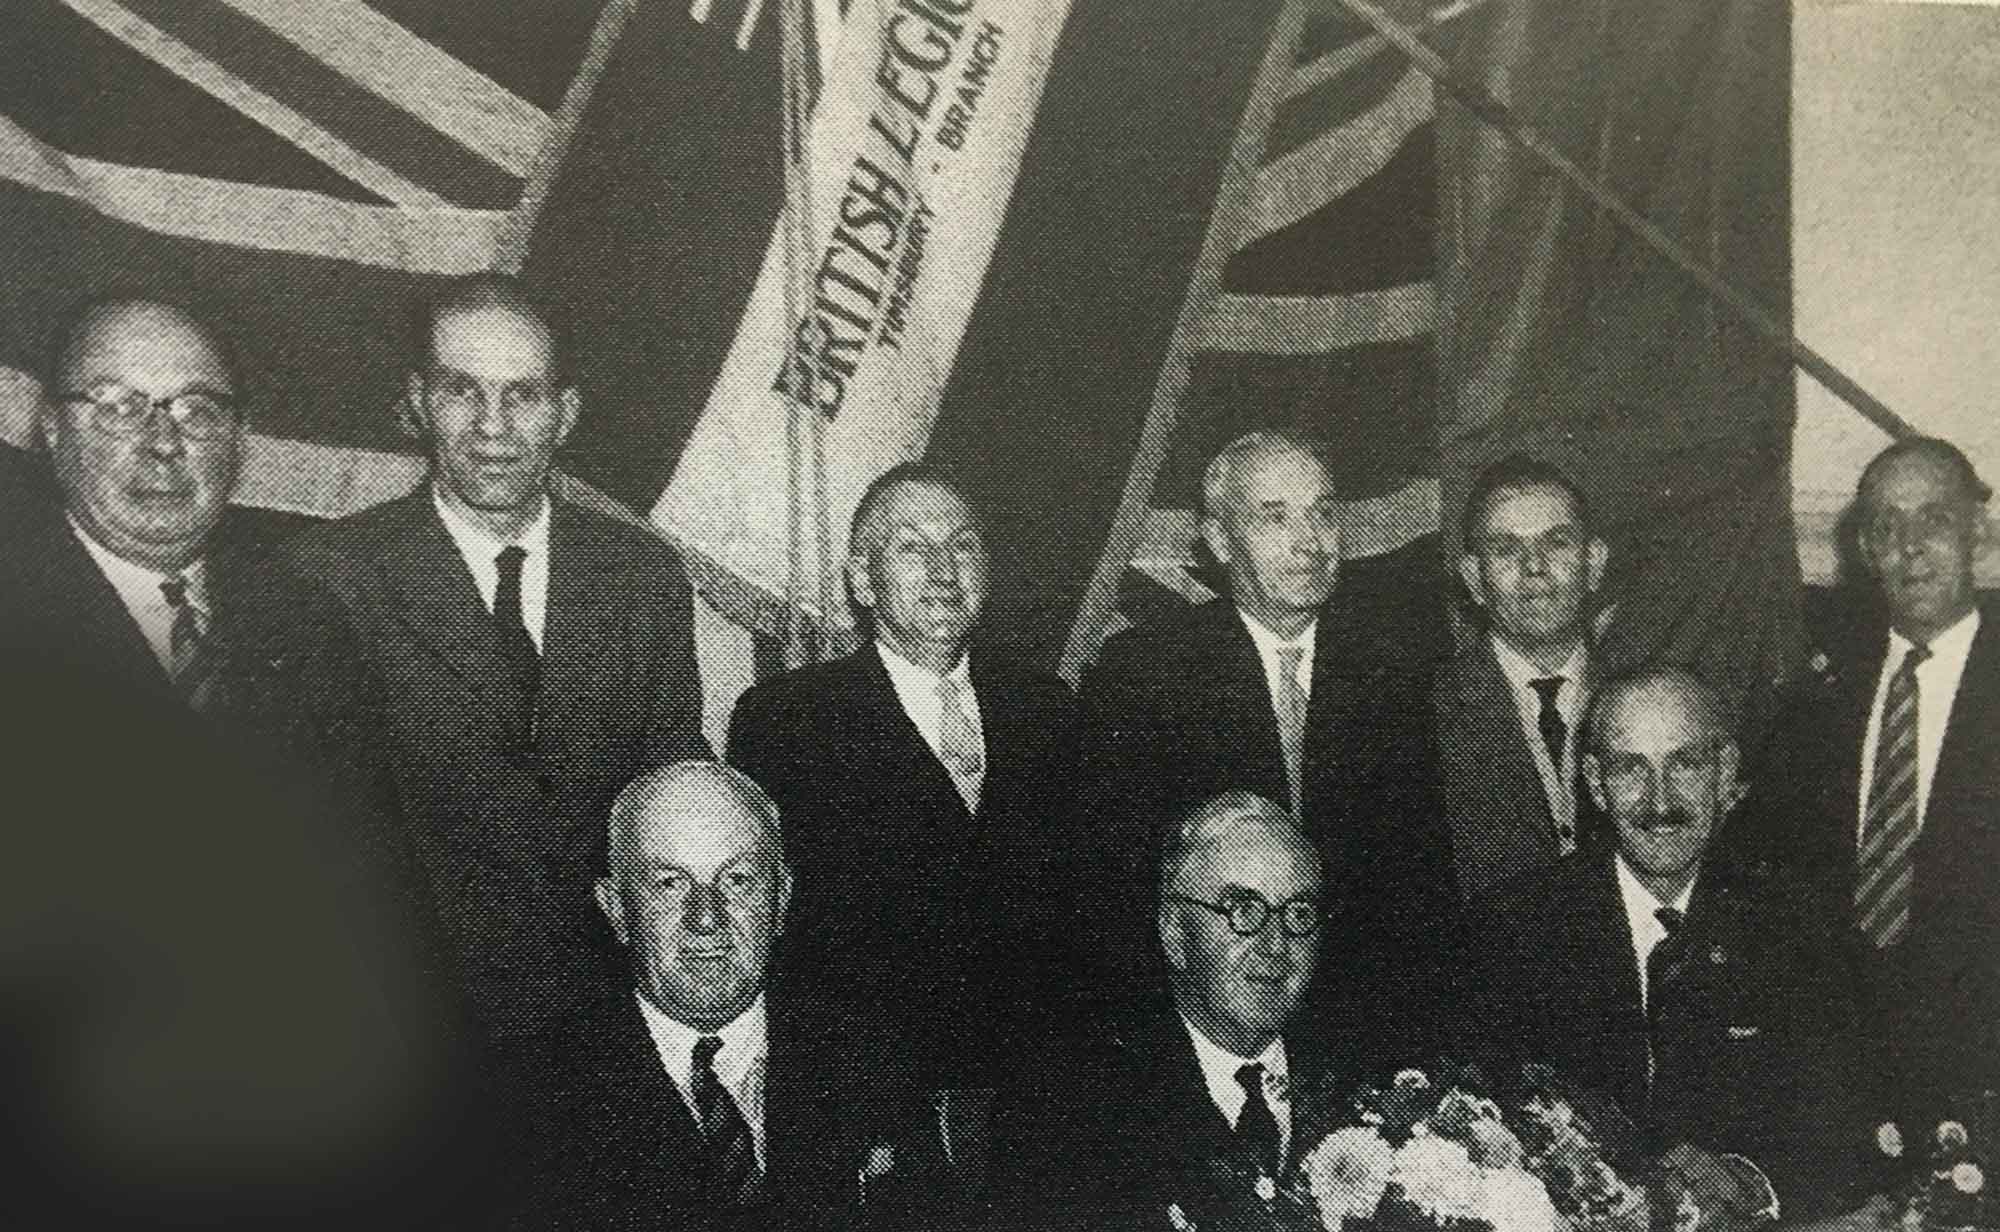 British Legion Officials and Committee 1950s